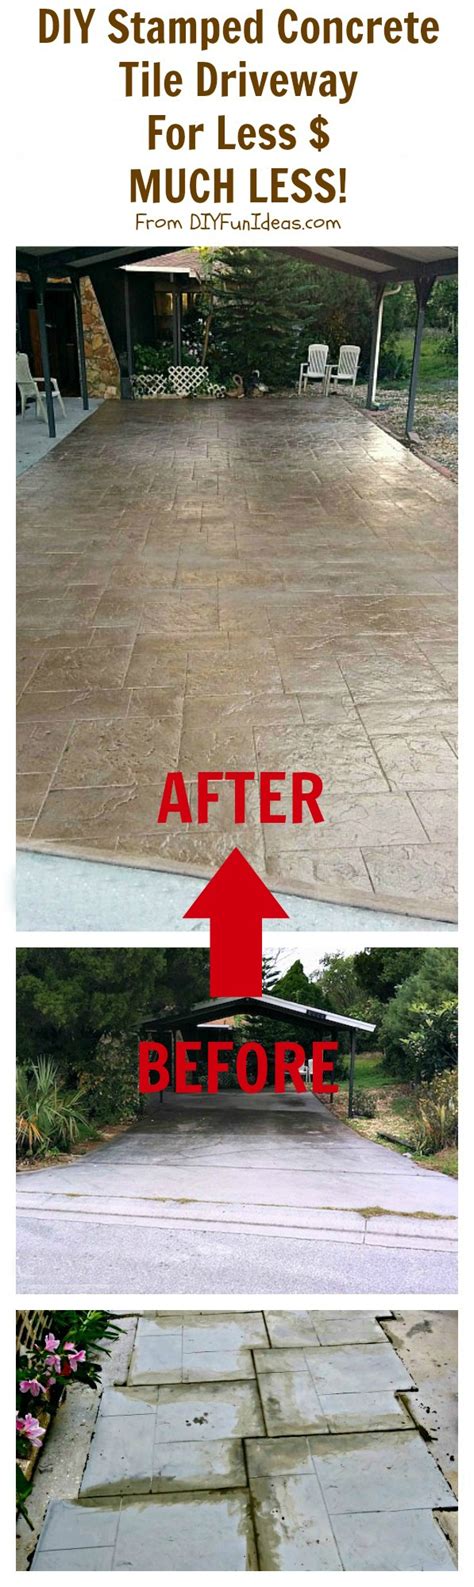 If a power wash doesn't remove all the dirt and oil, do an acid wash as well.4 x expert source melissa & michael gabso remodel & redesign experts expert interview. GORGEOUS DIY STAMPED CONCRETE TILE DRIVEWAY FOR LESS $...MUCH LESS!!! - Do-It-Yourself Fun Ideas